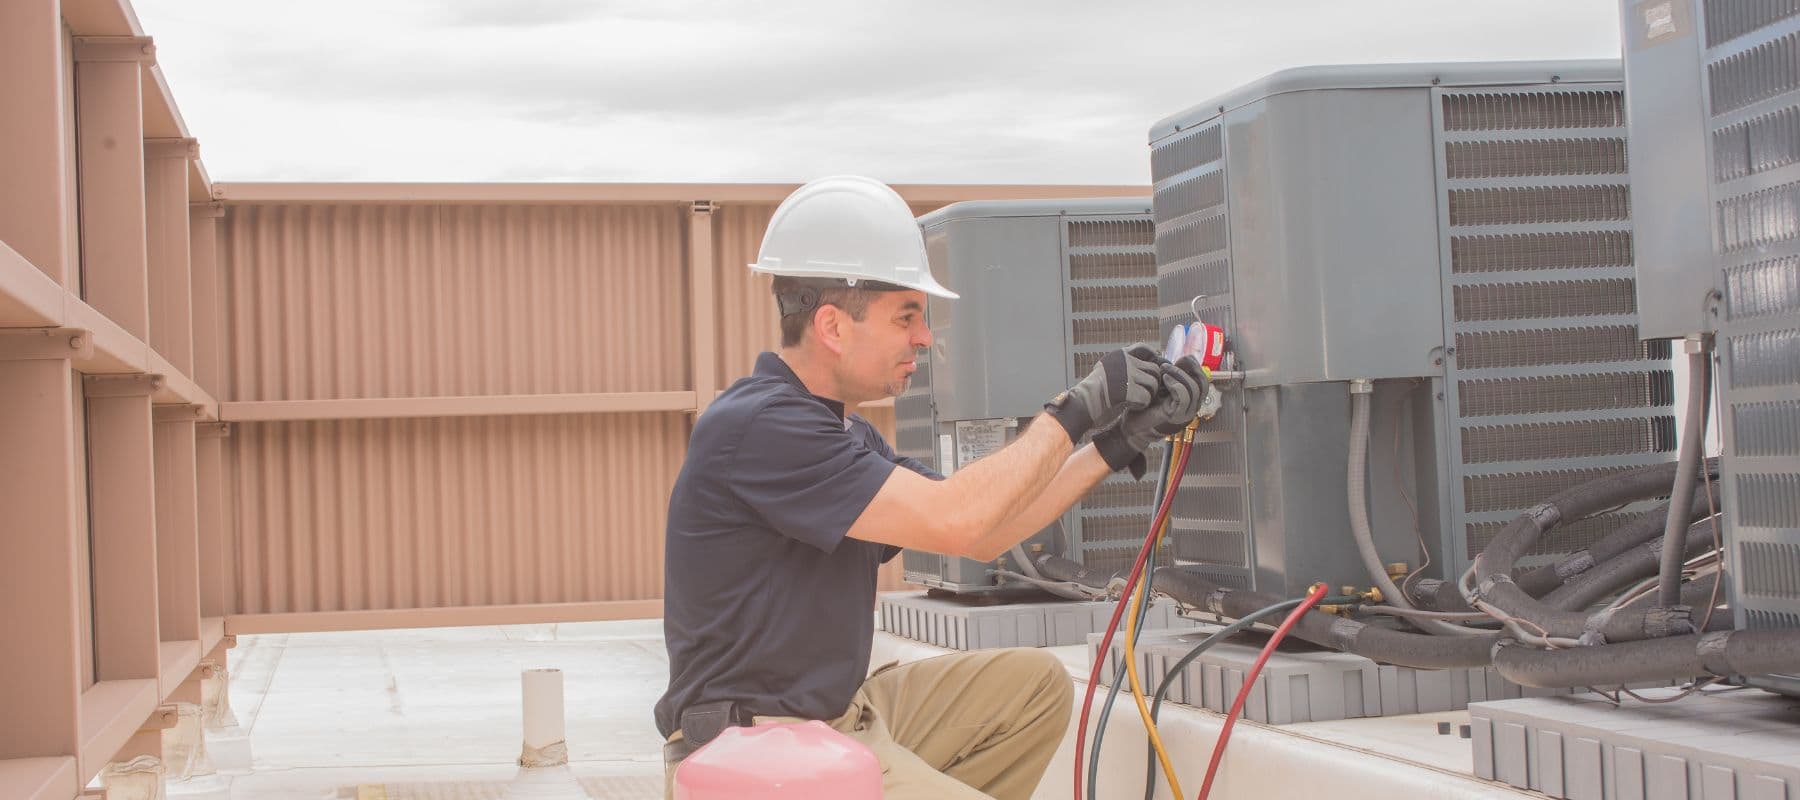 hvac technician wearing a hard hat and gloves while performing repairs on outdoor hvac units that are positioned on the top of a commercial building